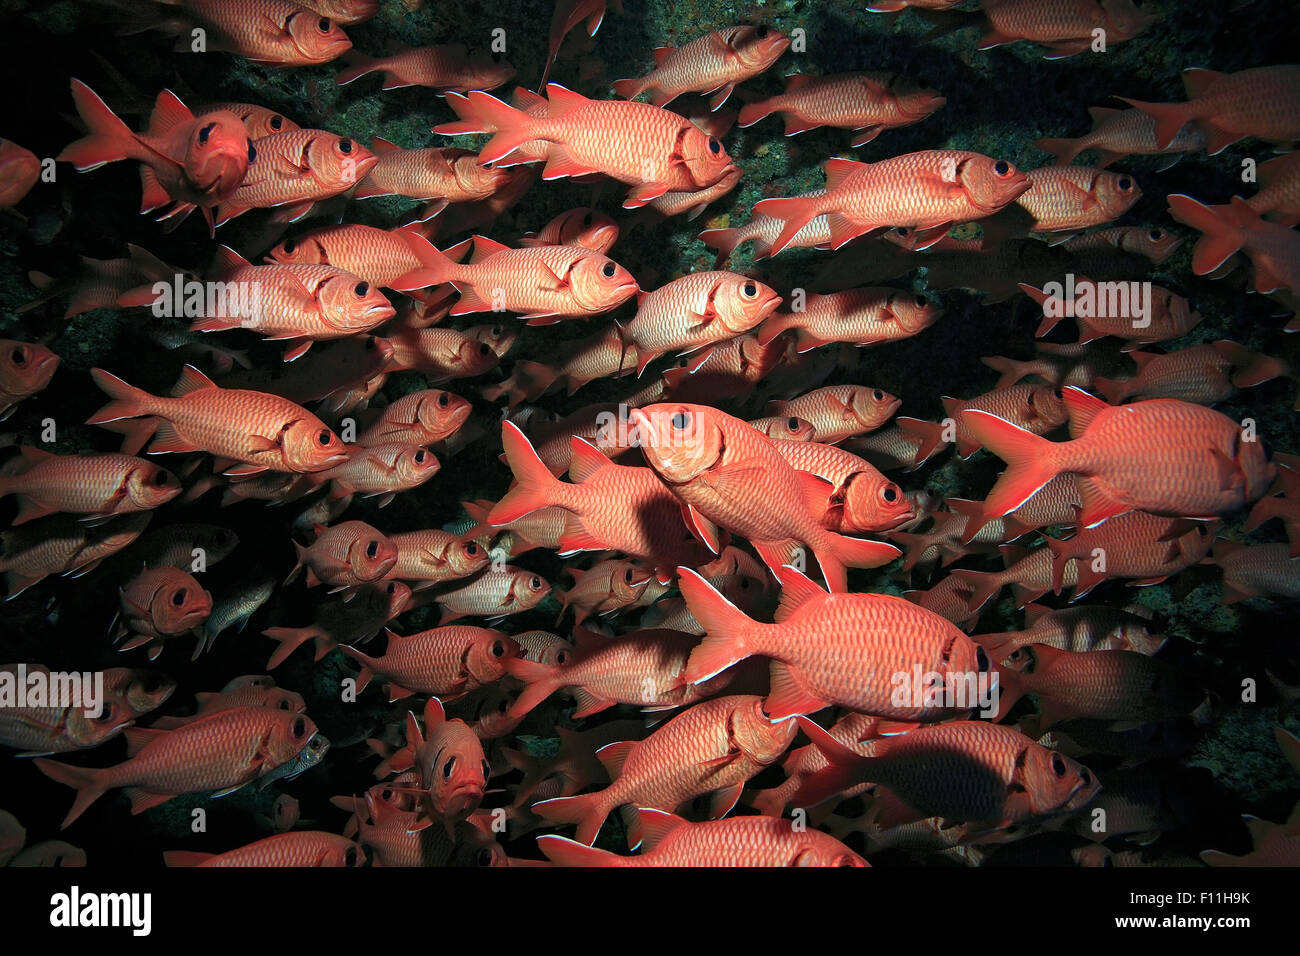 SCHOOL OF SOLDIERFISH WAITING IN UNDERWATER CAVE Stock Photo